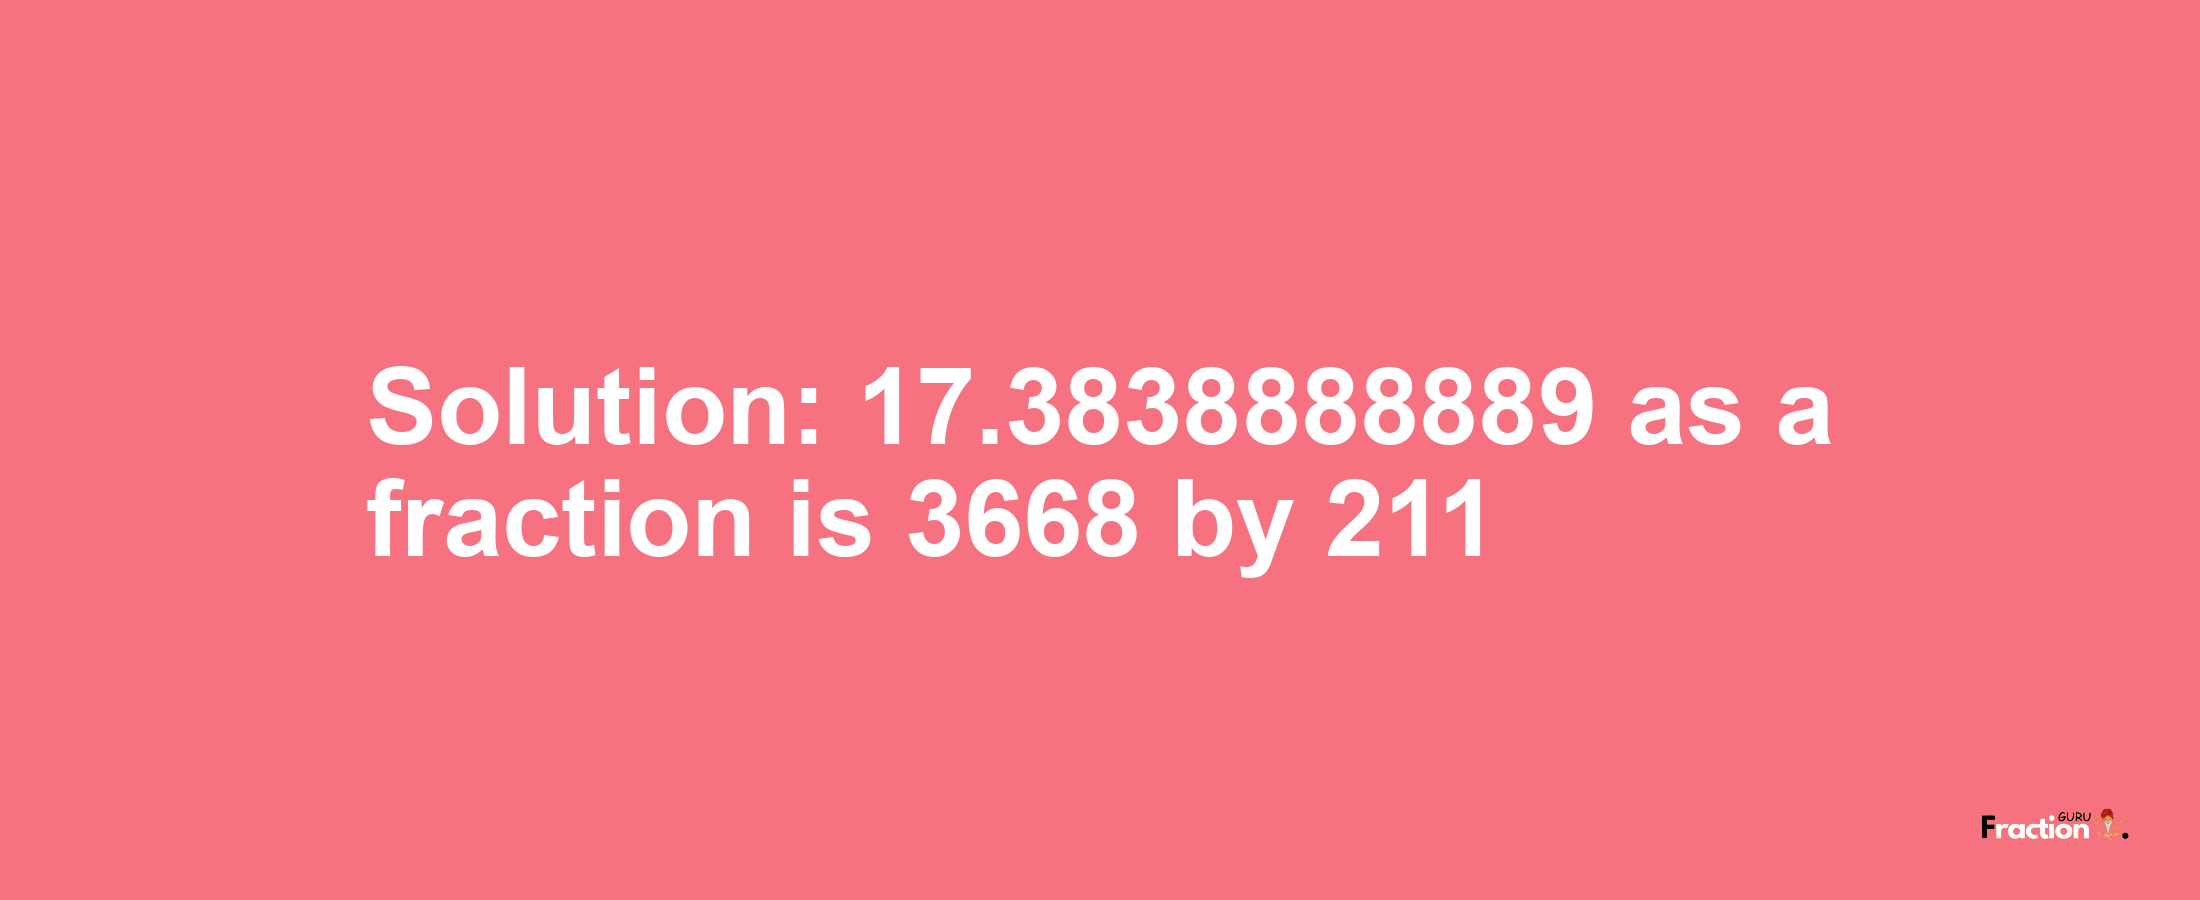 Solution:17.3838888889 as a fraction is 3668/211